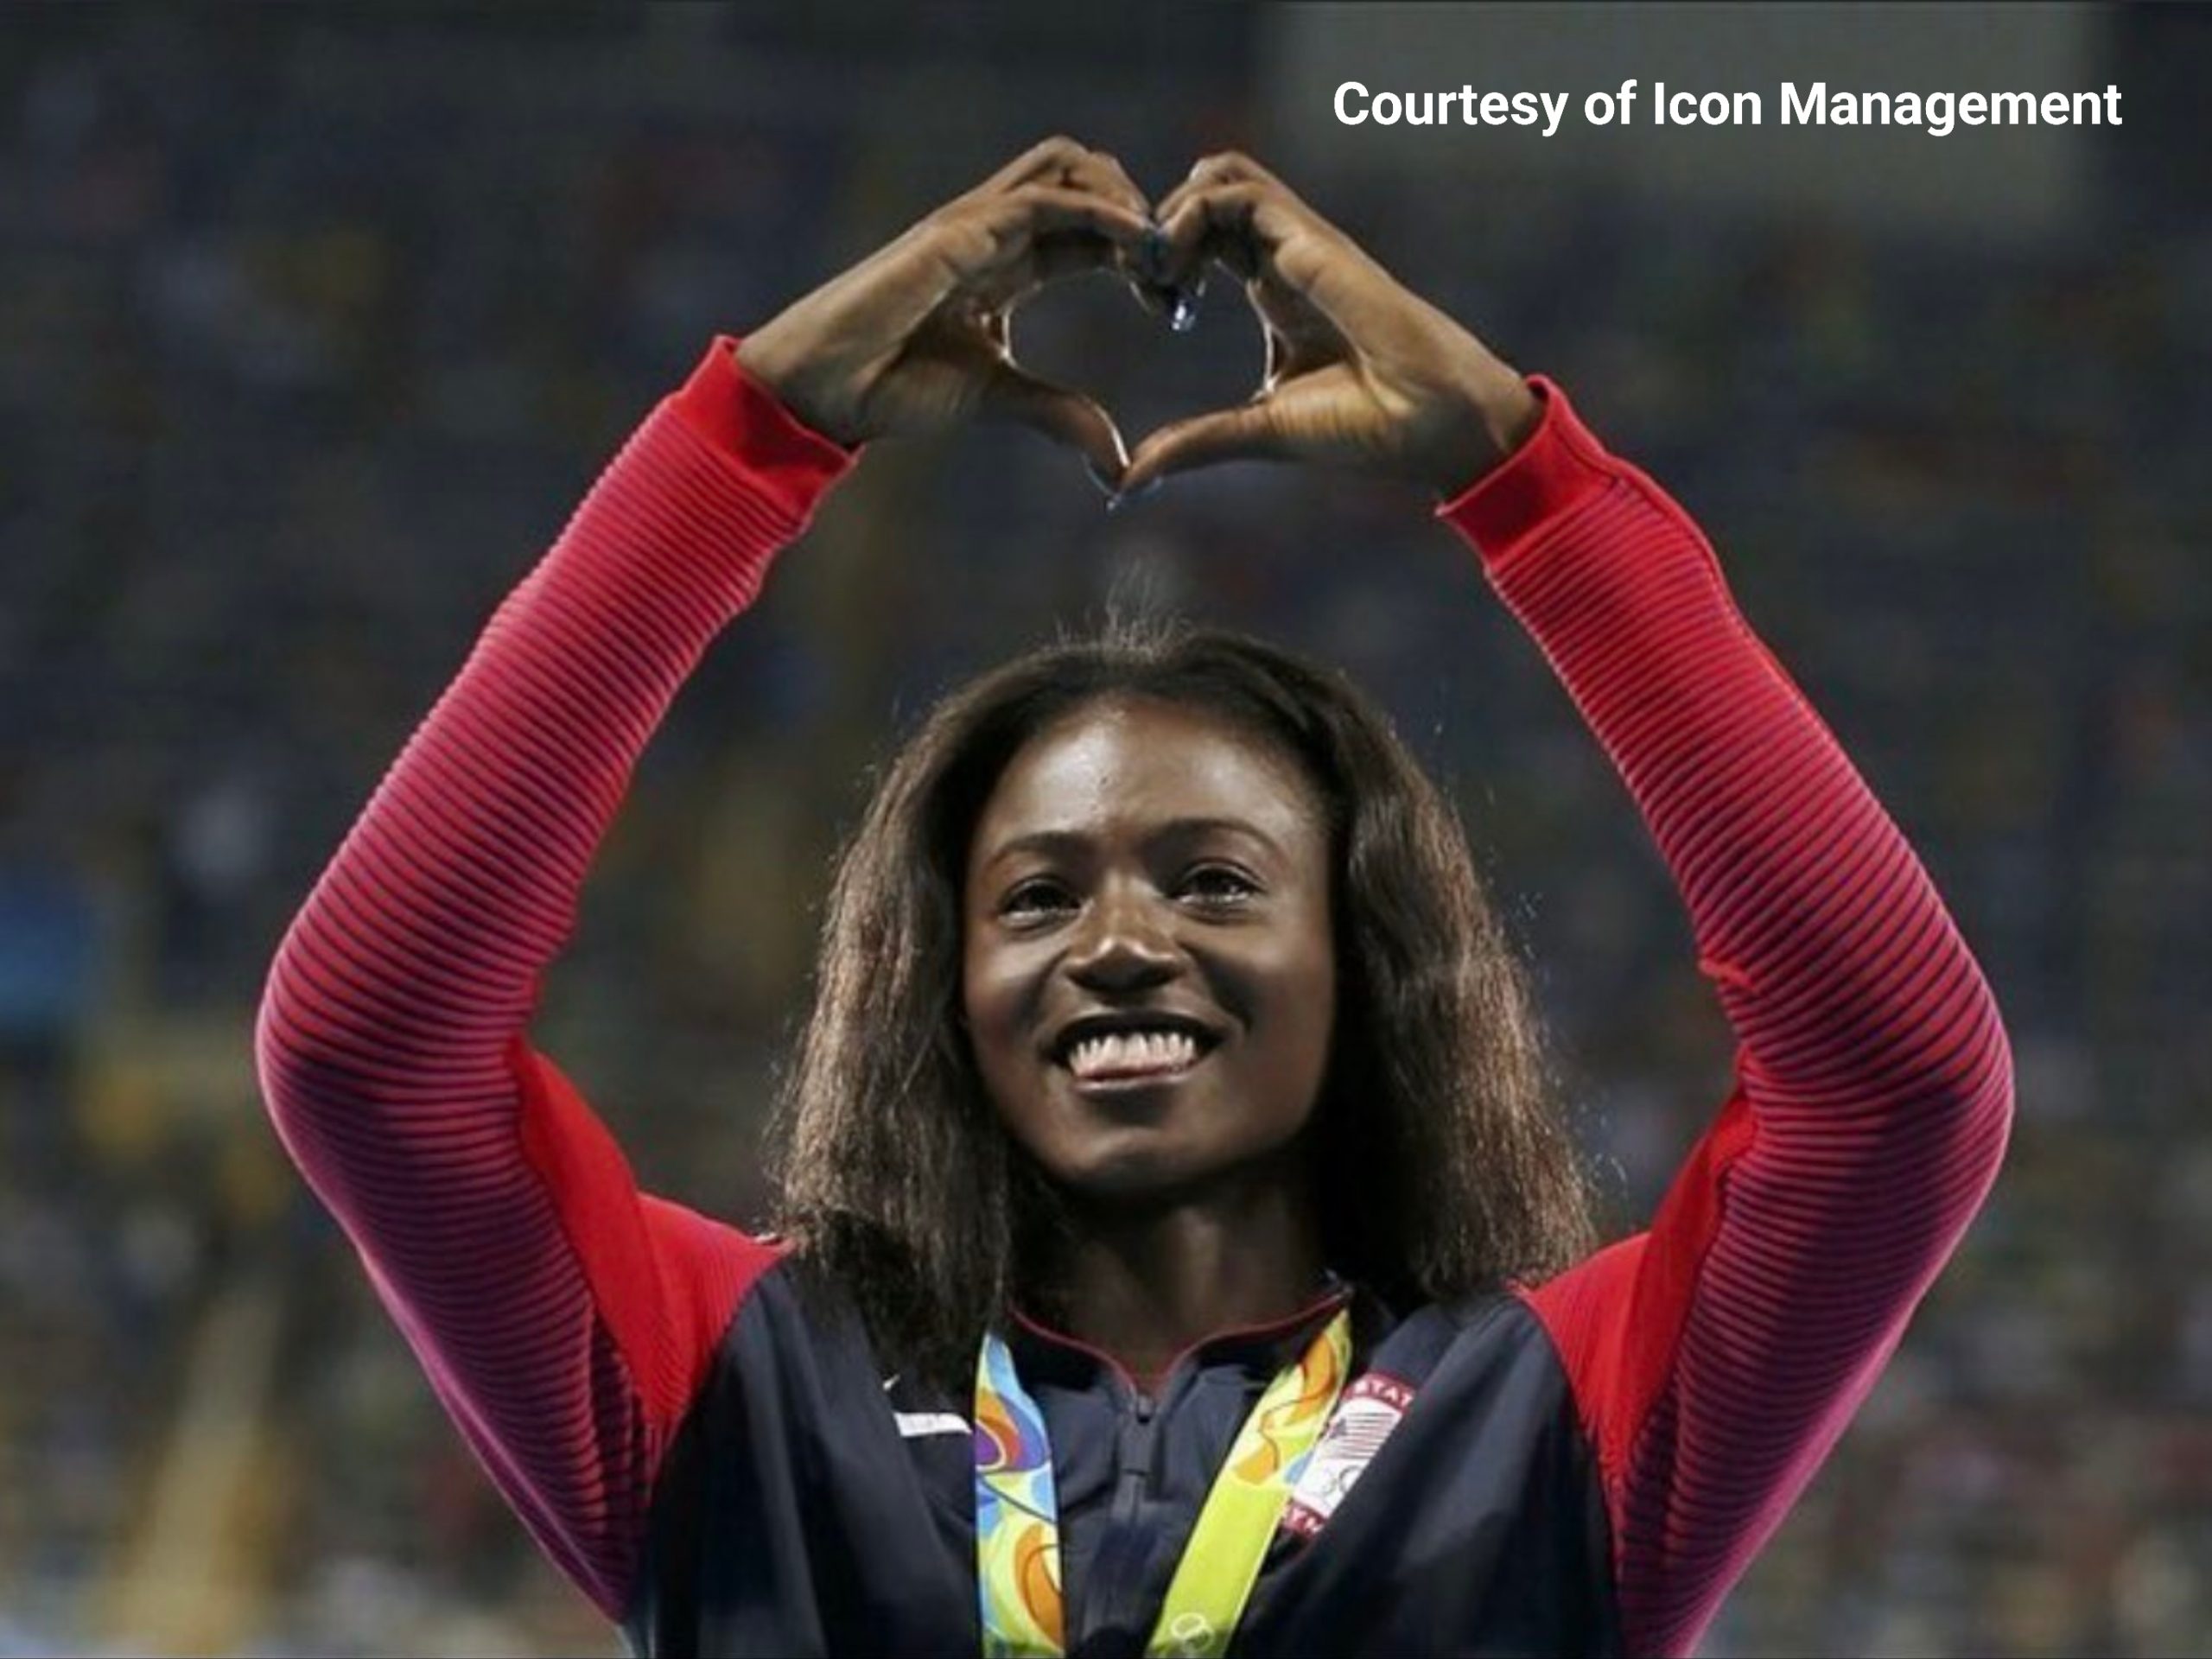 U.S. Olympic Gold Medalist Tori Bowie Dead at 32